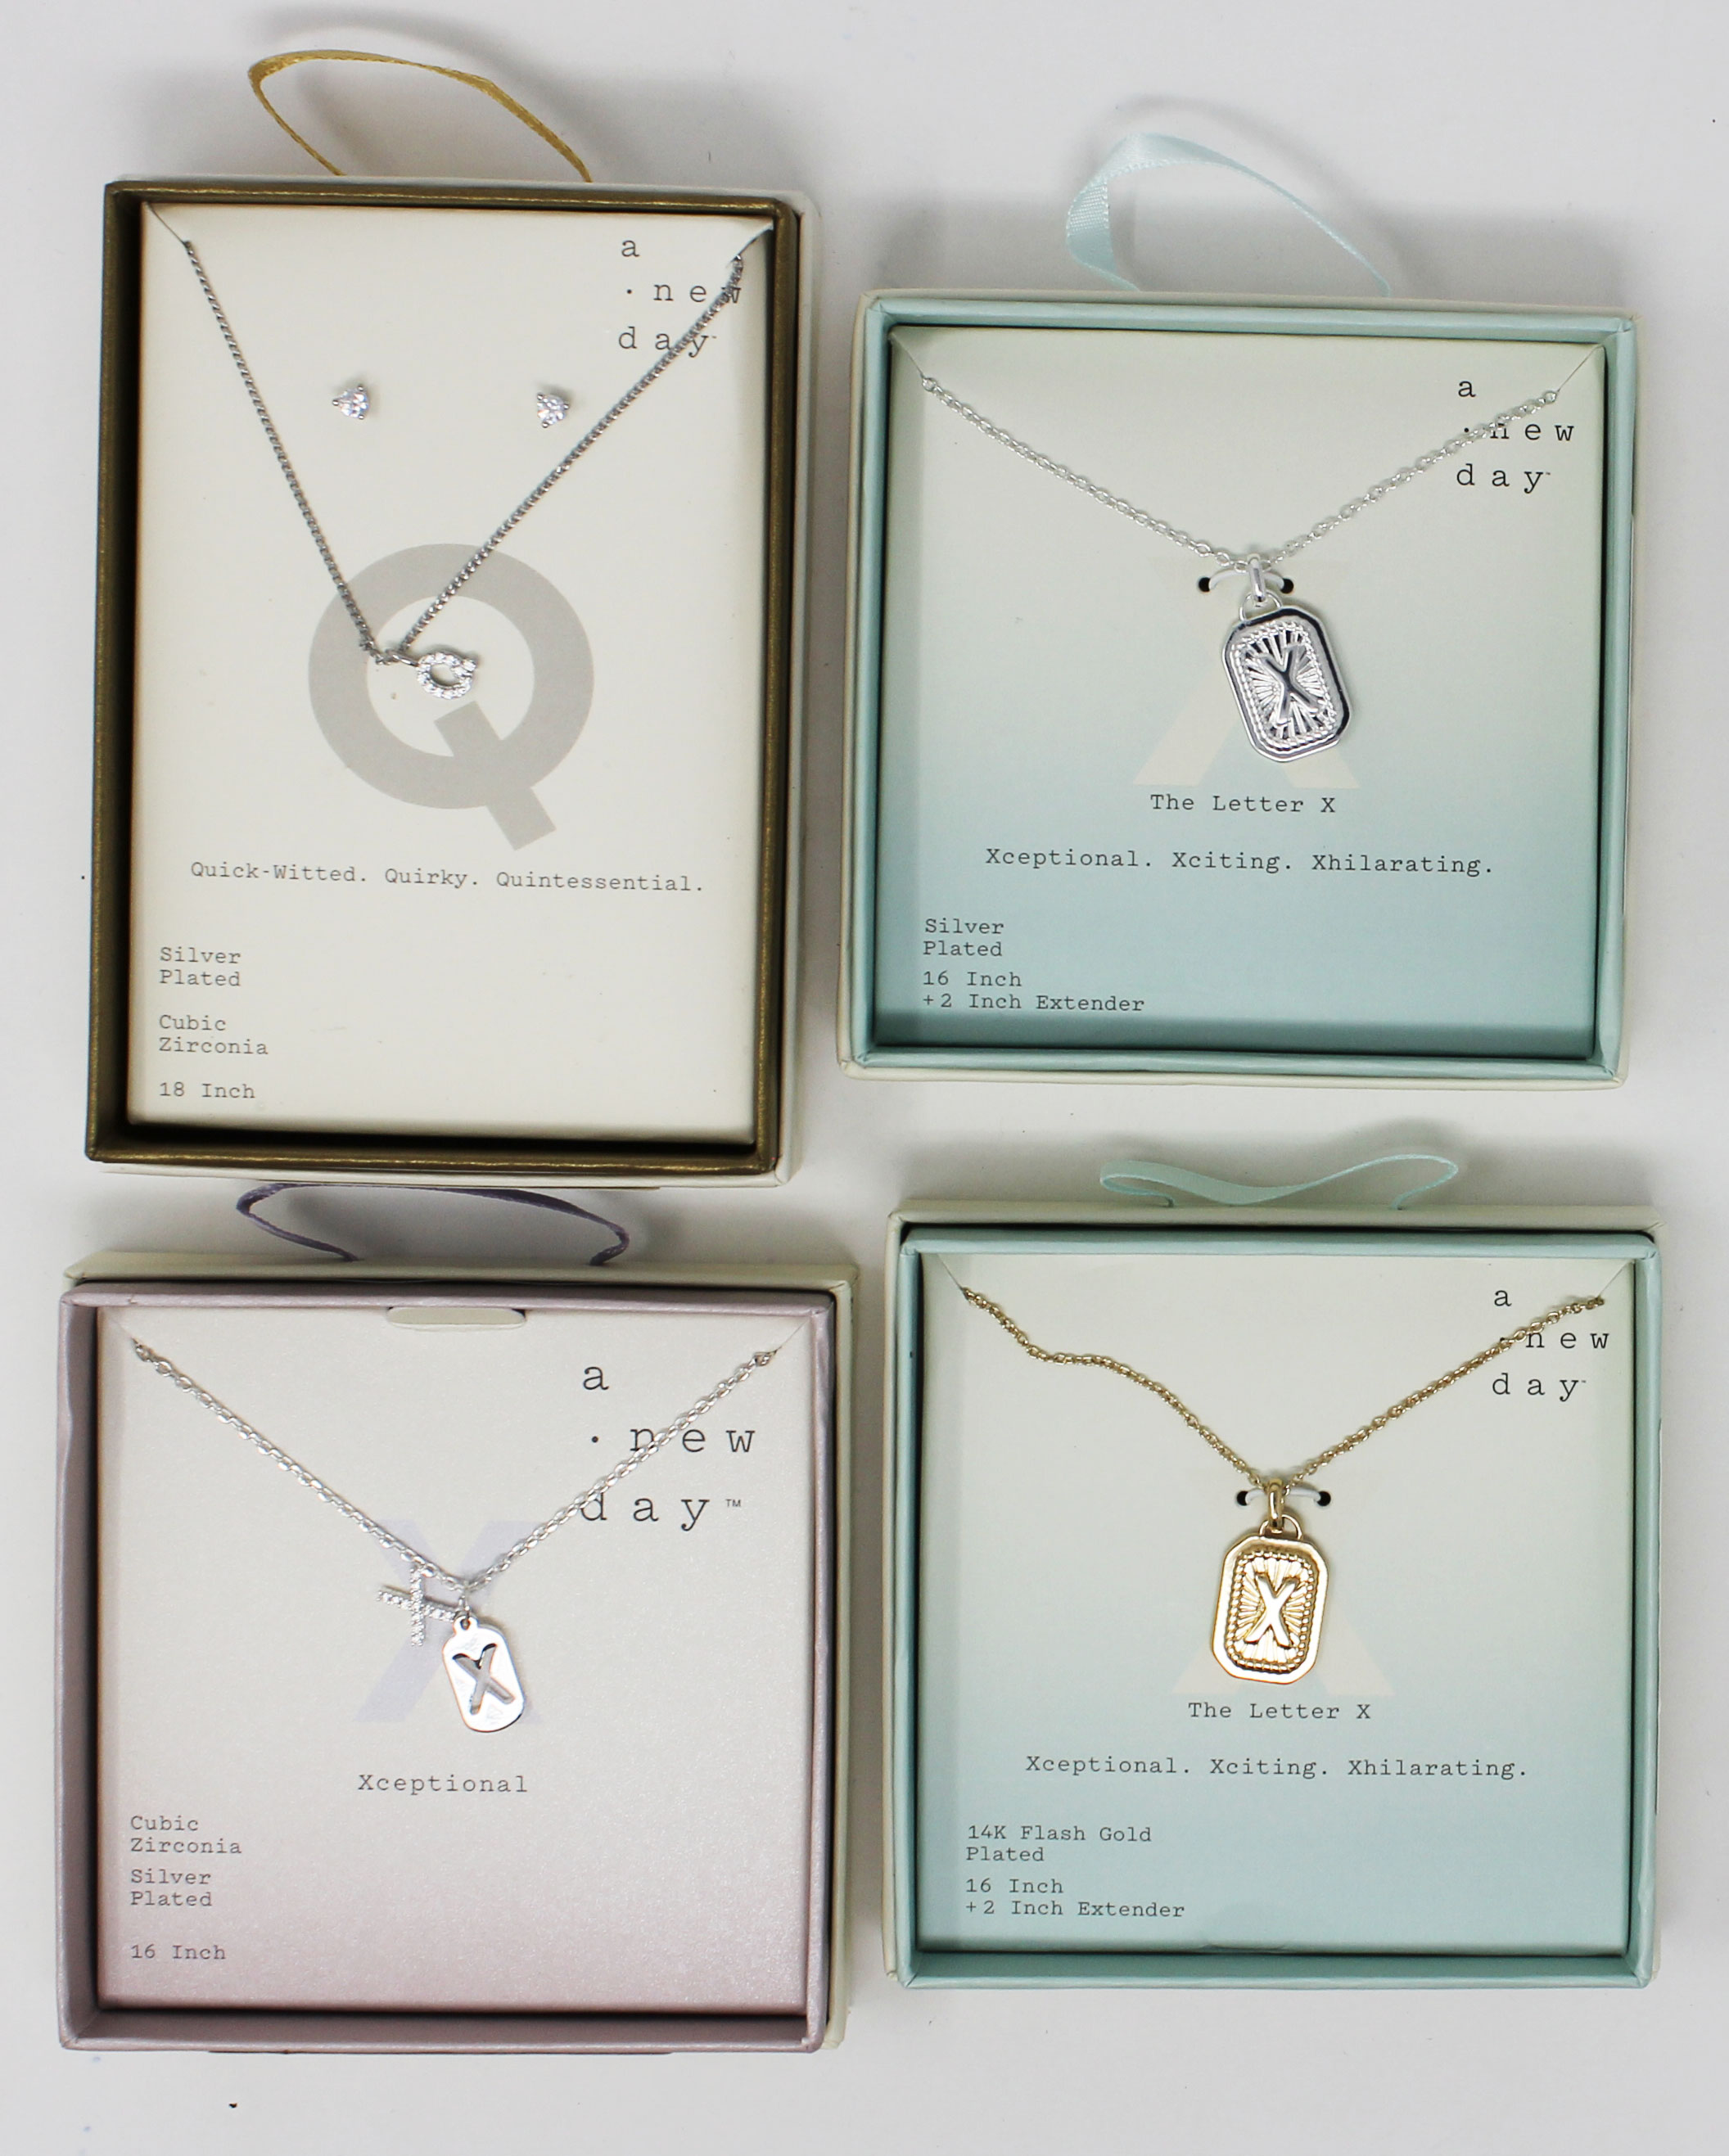 "Q" QUICK WITTED. QUIRKY. QUINTESSENTIAL. SILVER PLATED CUBIC ZIRCONIA 18 INCH NECKLACE SET MIX ASST